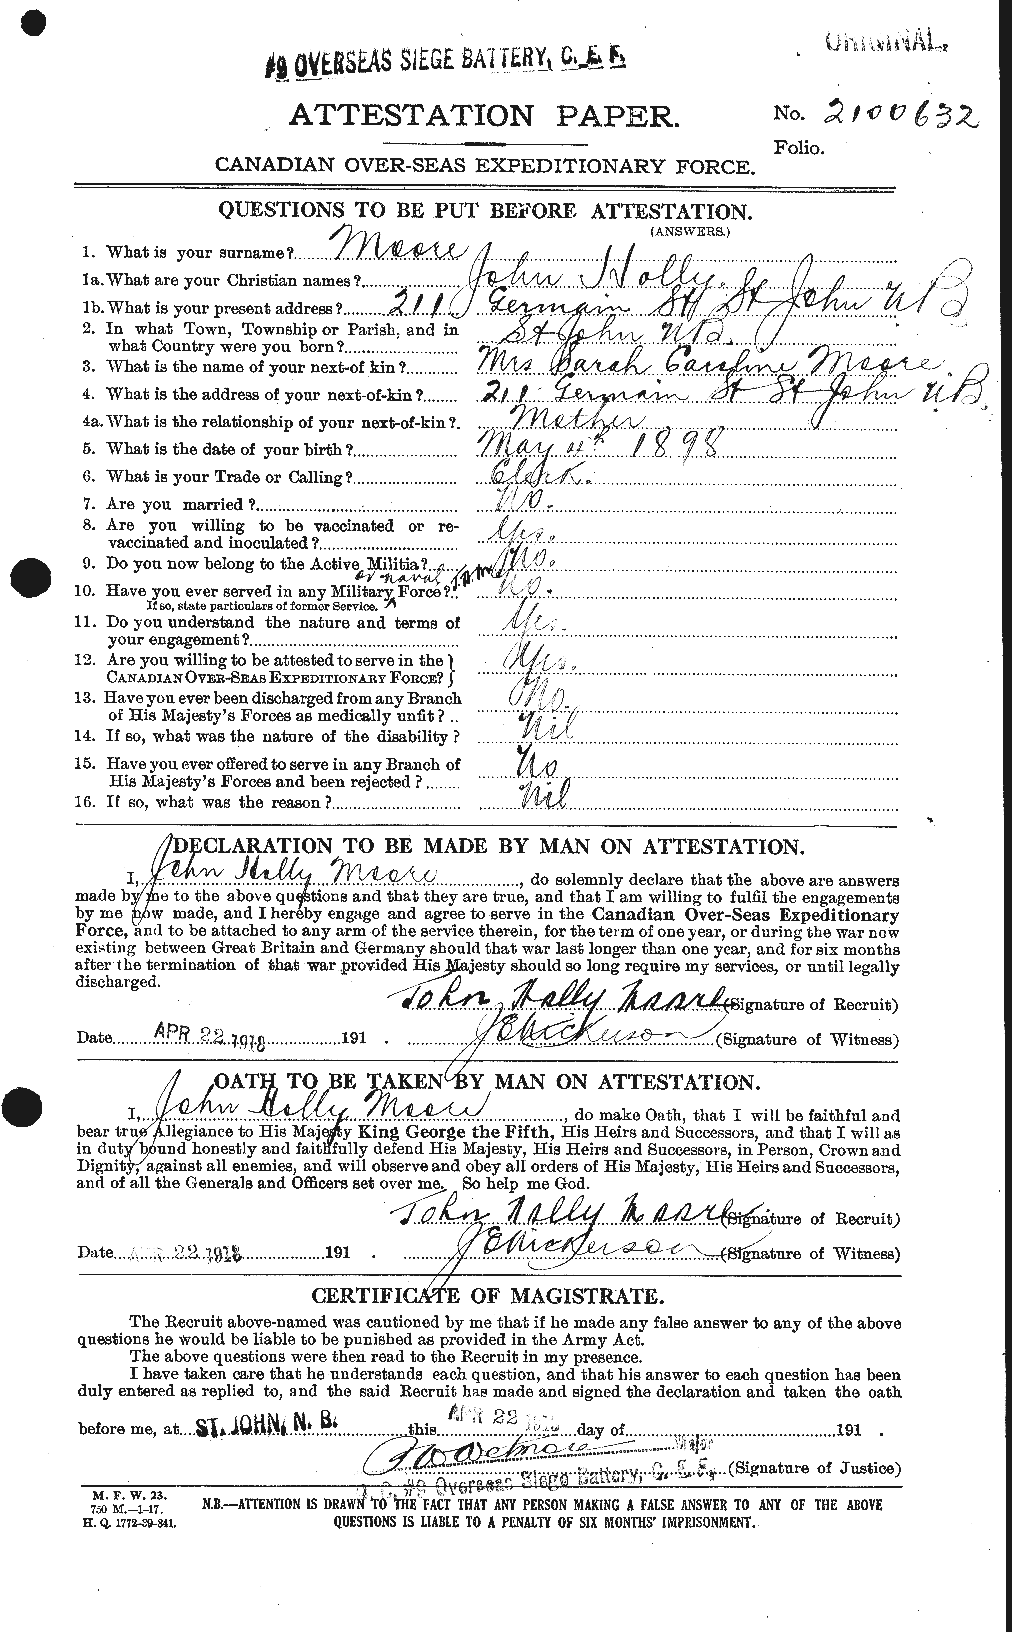 Personnel Records of the First World War - CEF 503298a